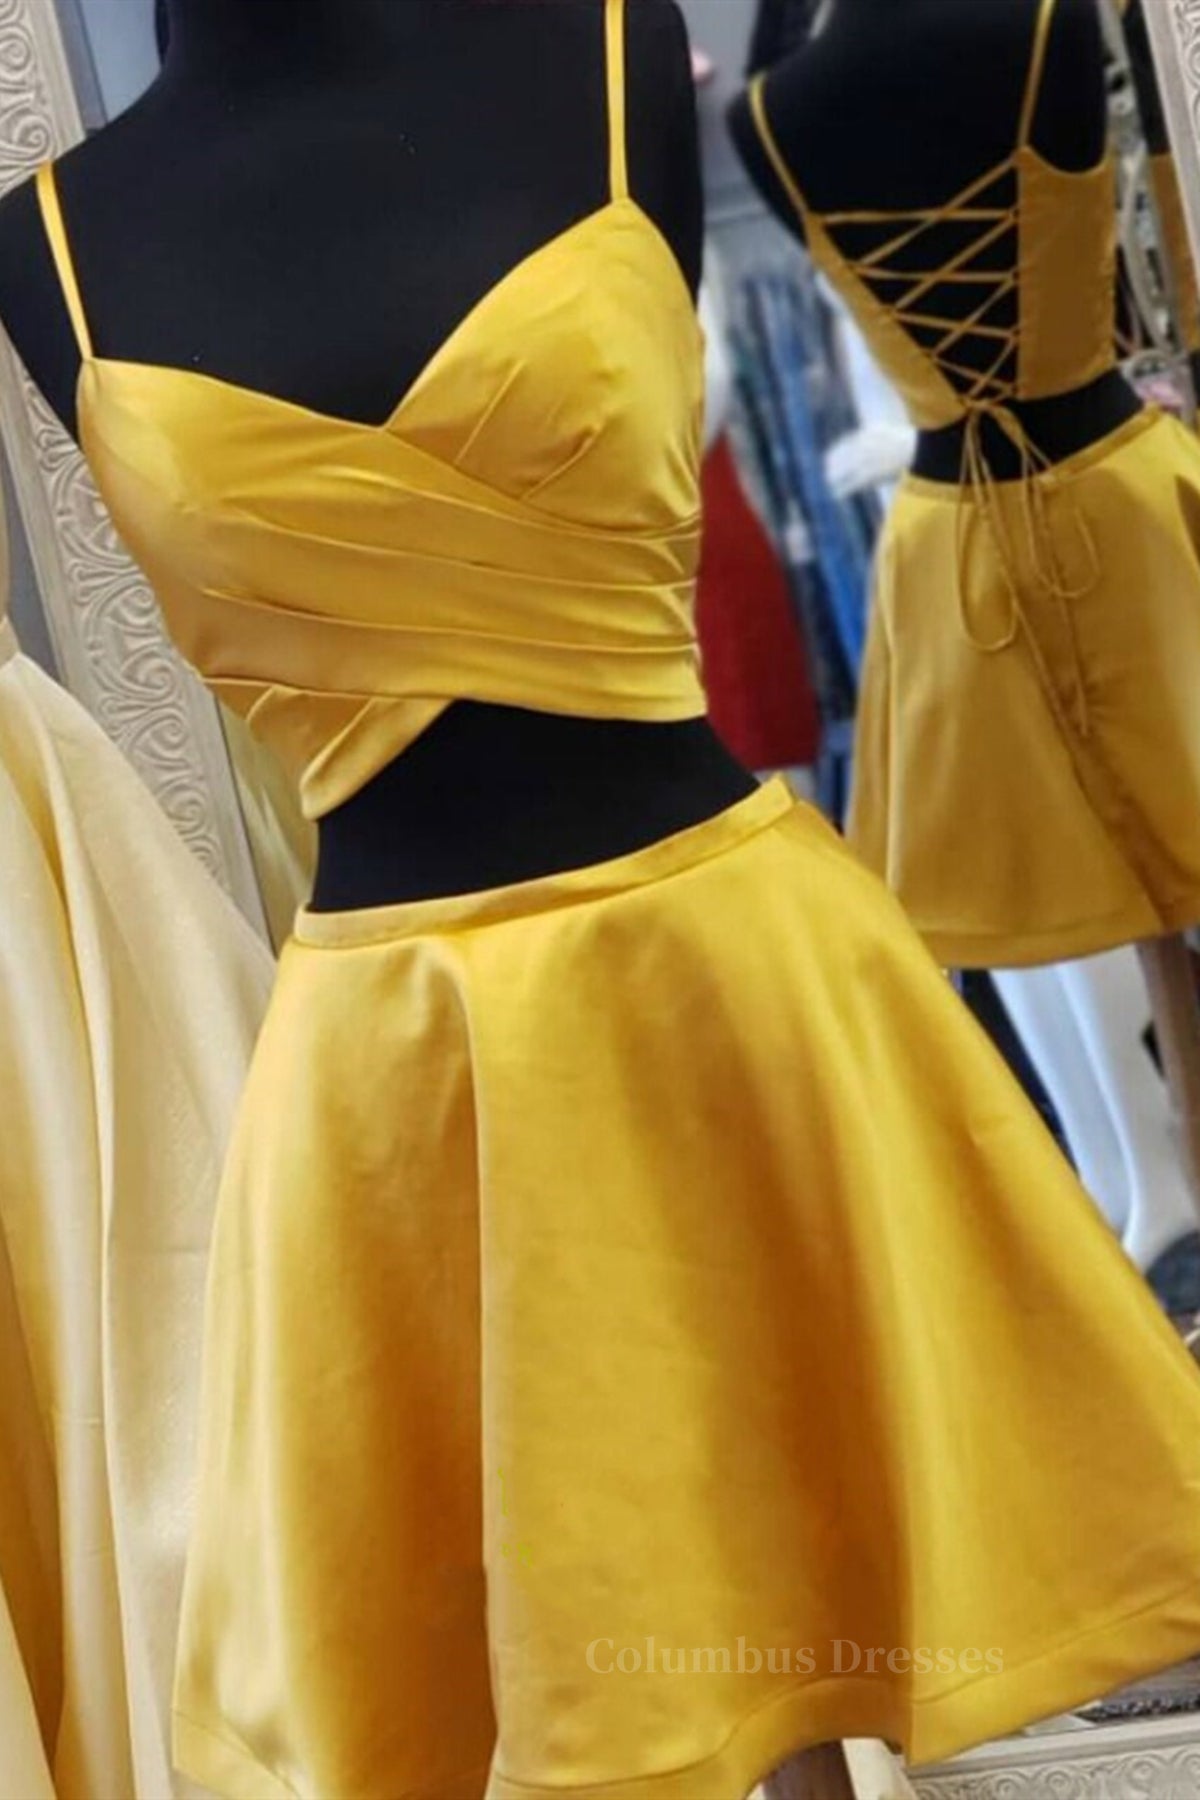 Prom Dress For Girl, Two Pieces Short Yellow Prom Dresses, Short Yellow 2 Pieces Formal Homecoming Dresses